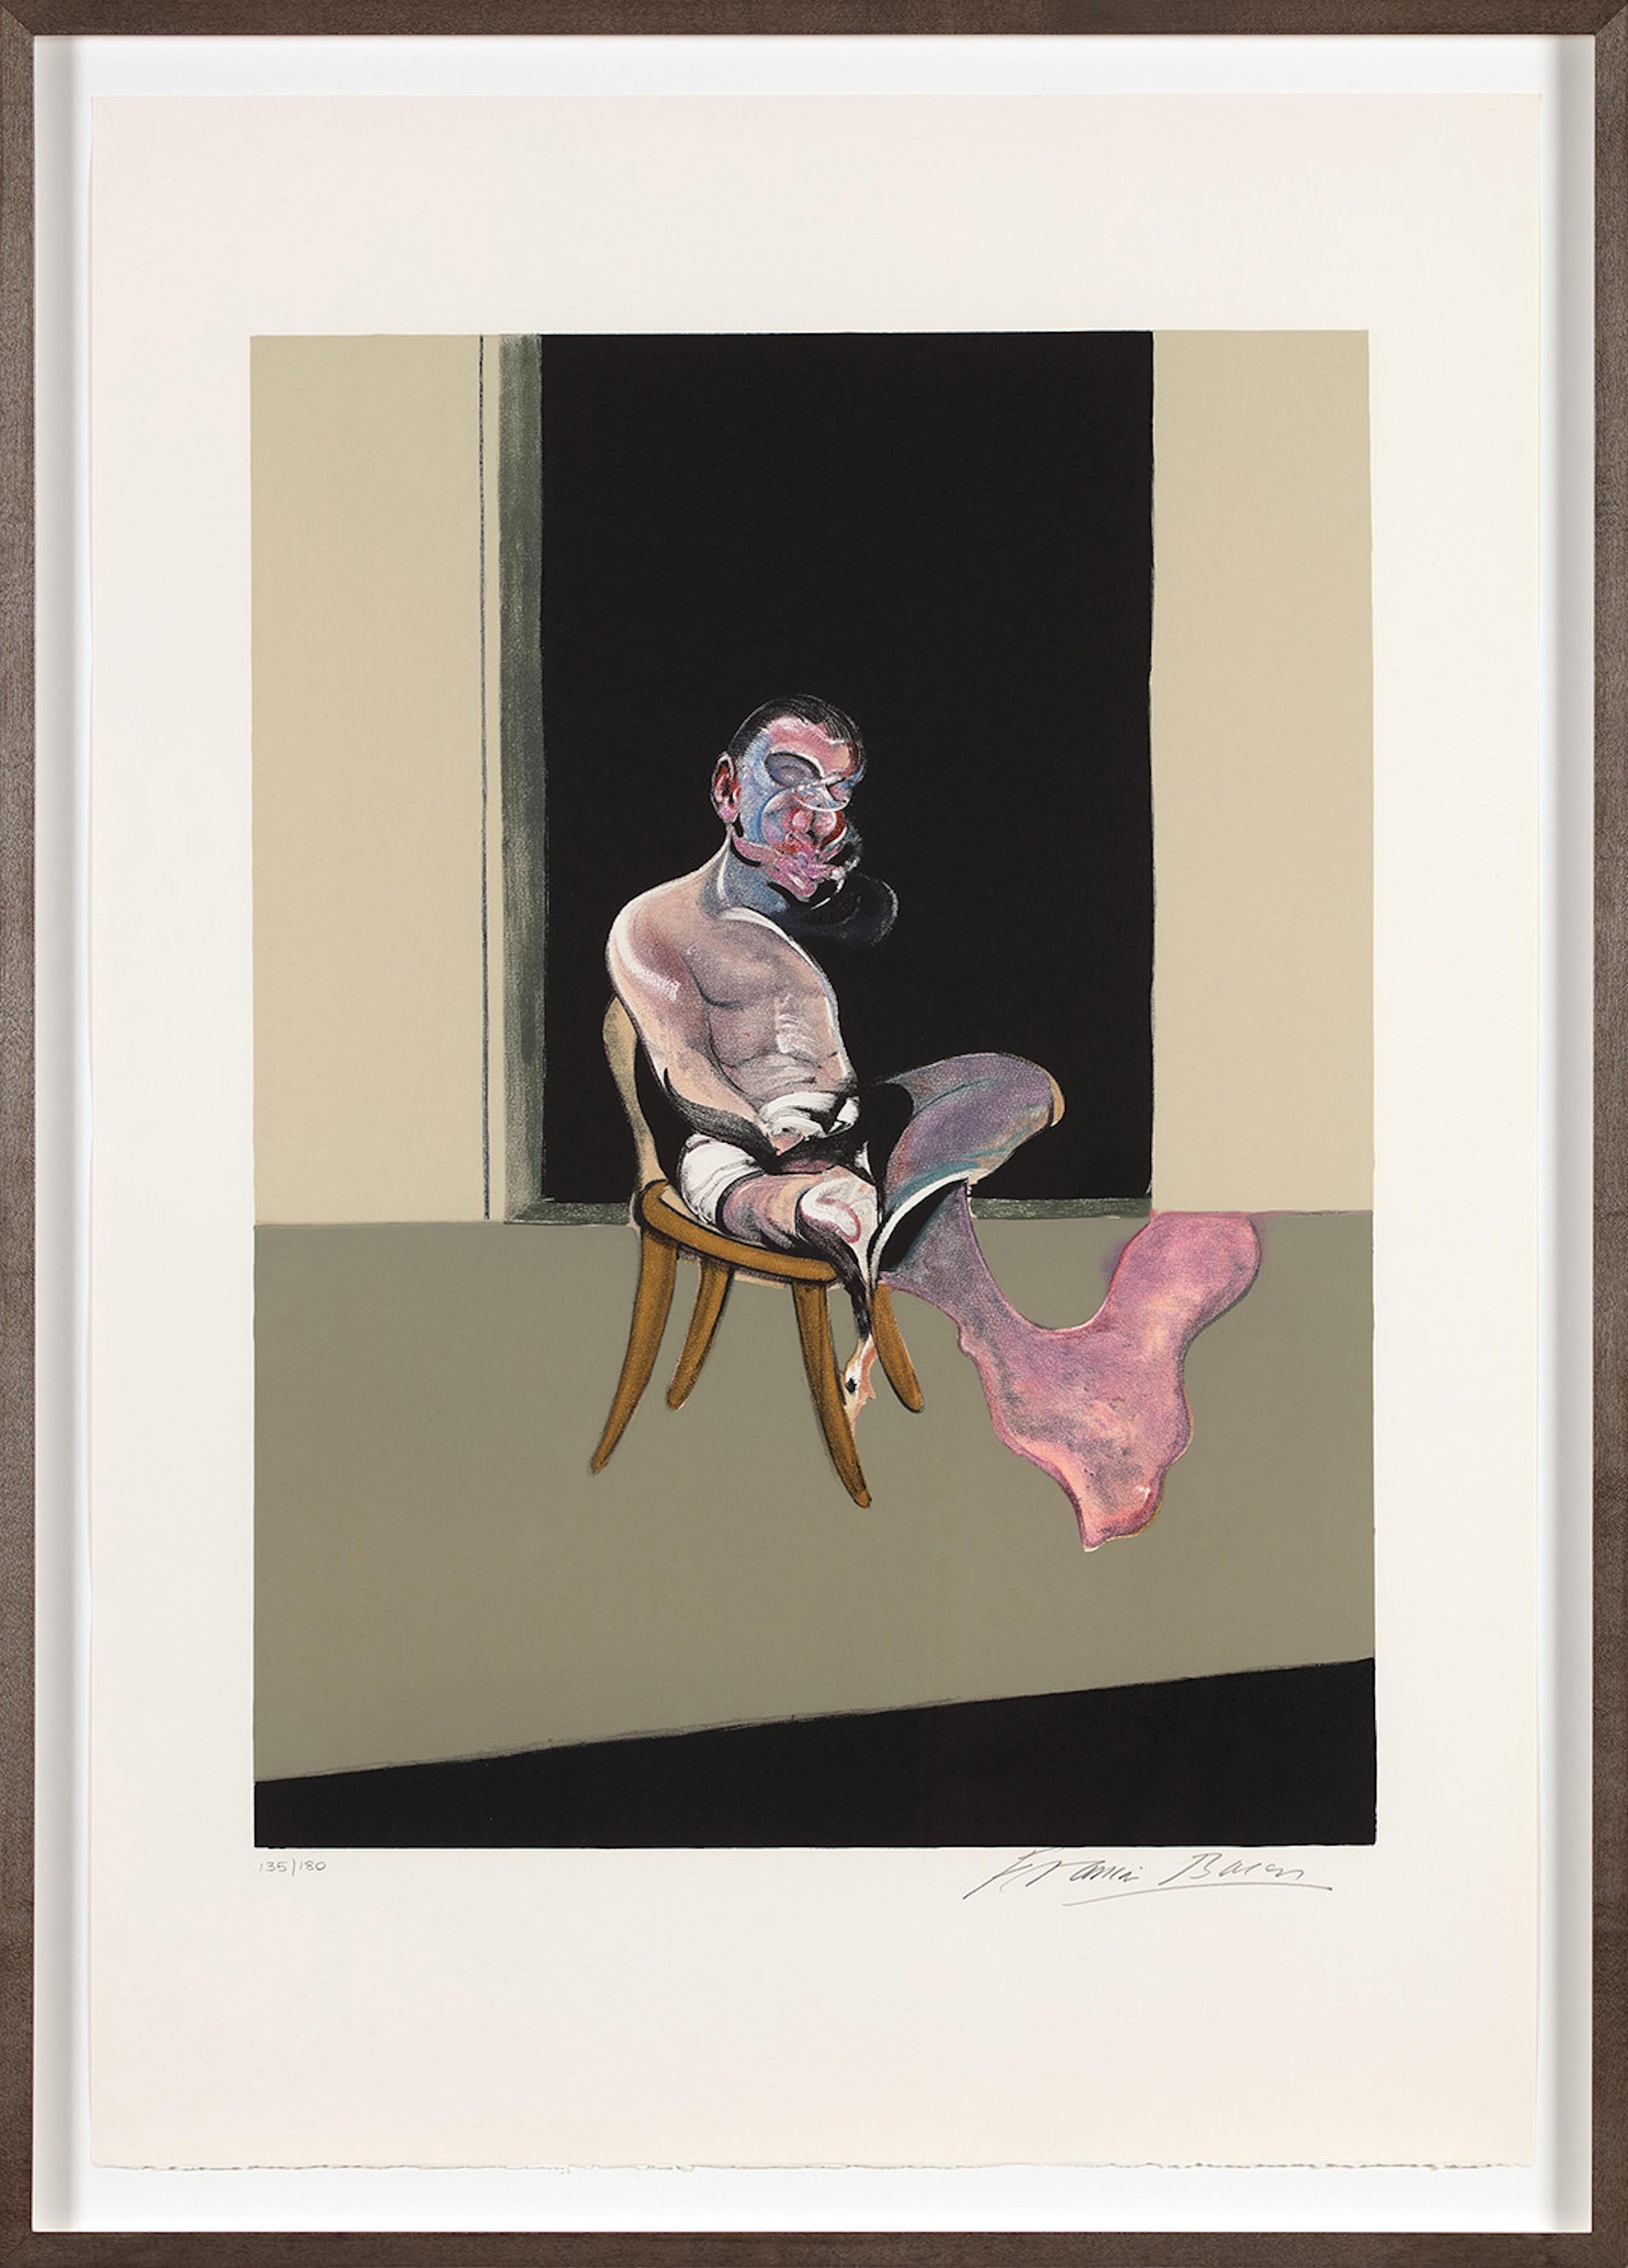 Francis Bacon Figurative Print - Triptych - August 1972 (Right Panel Only)